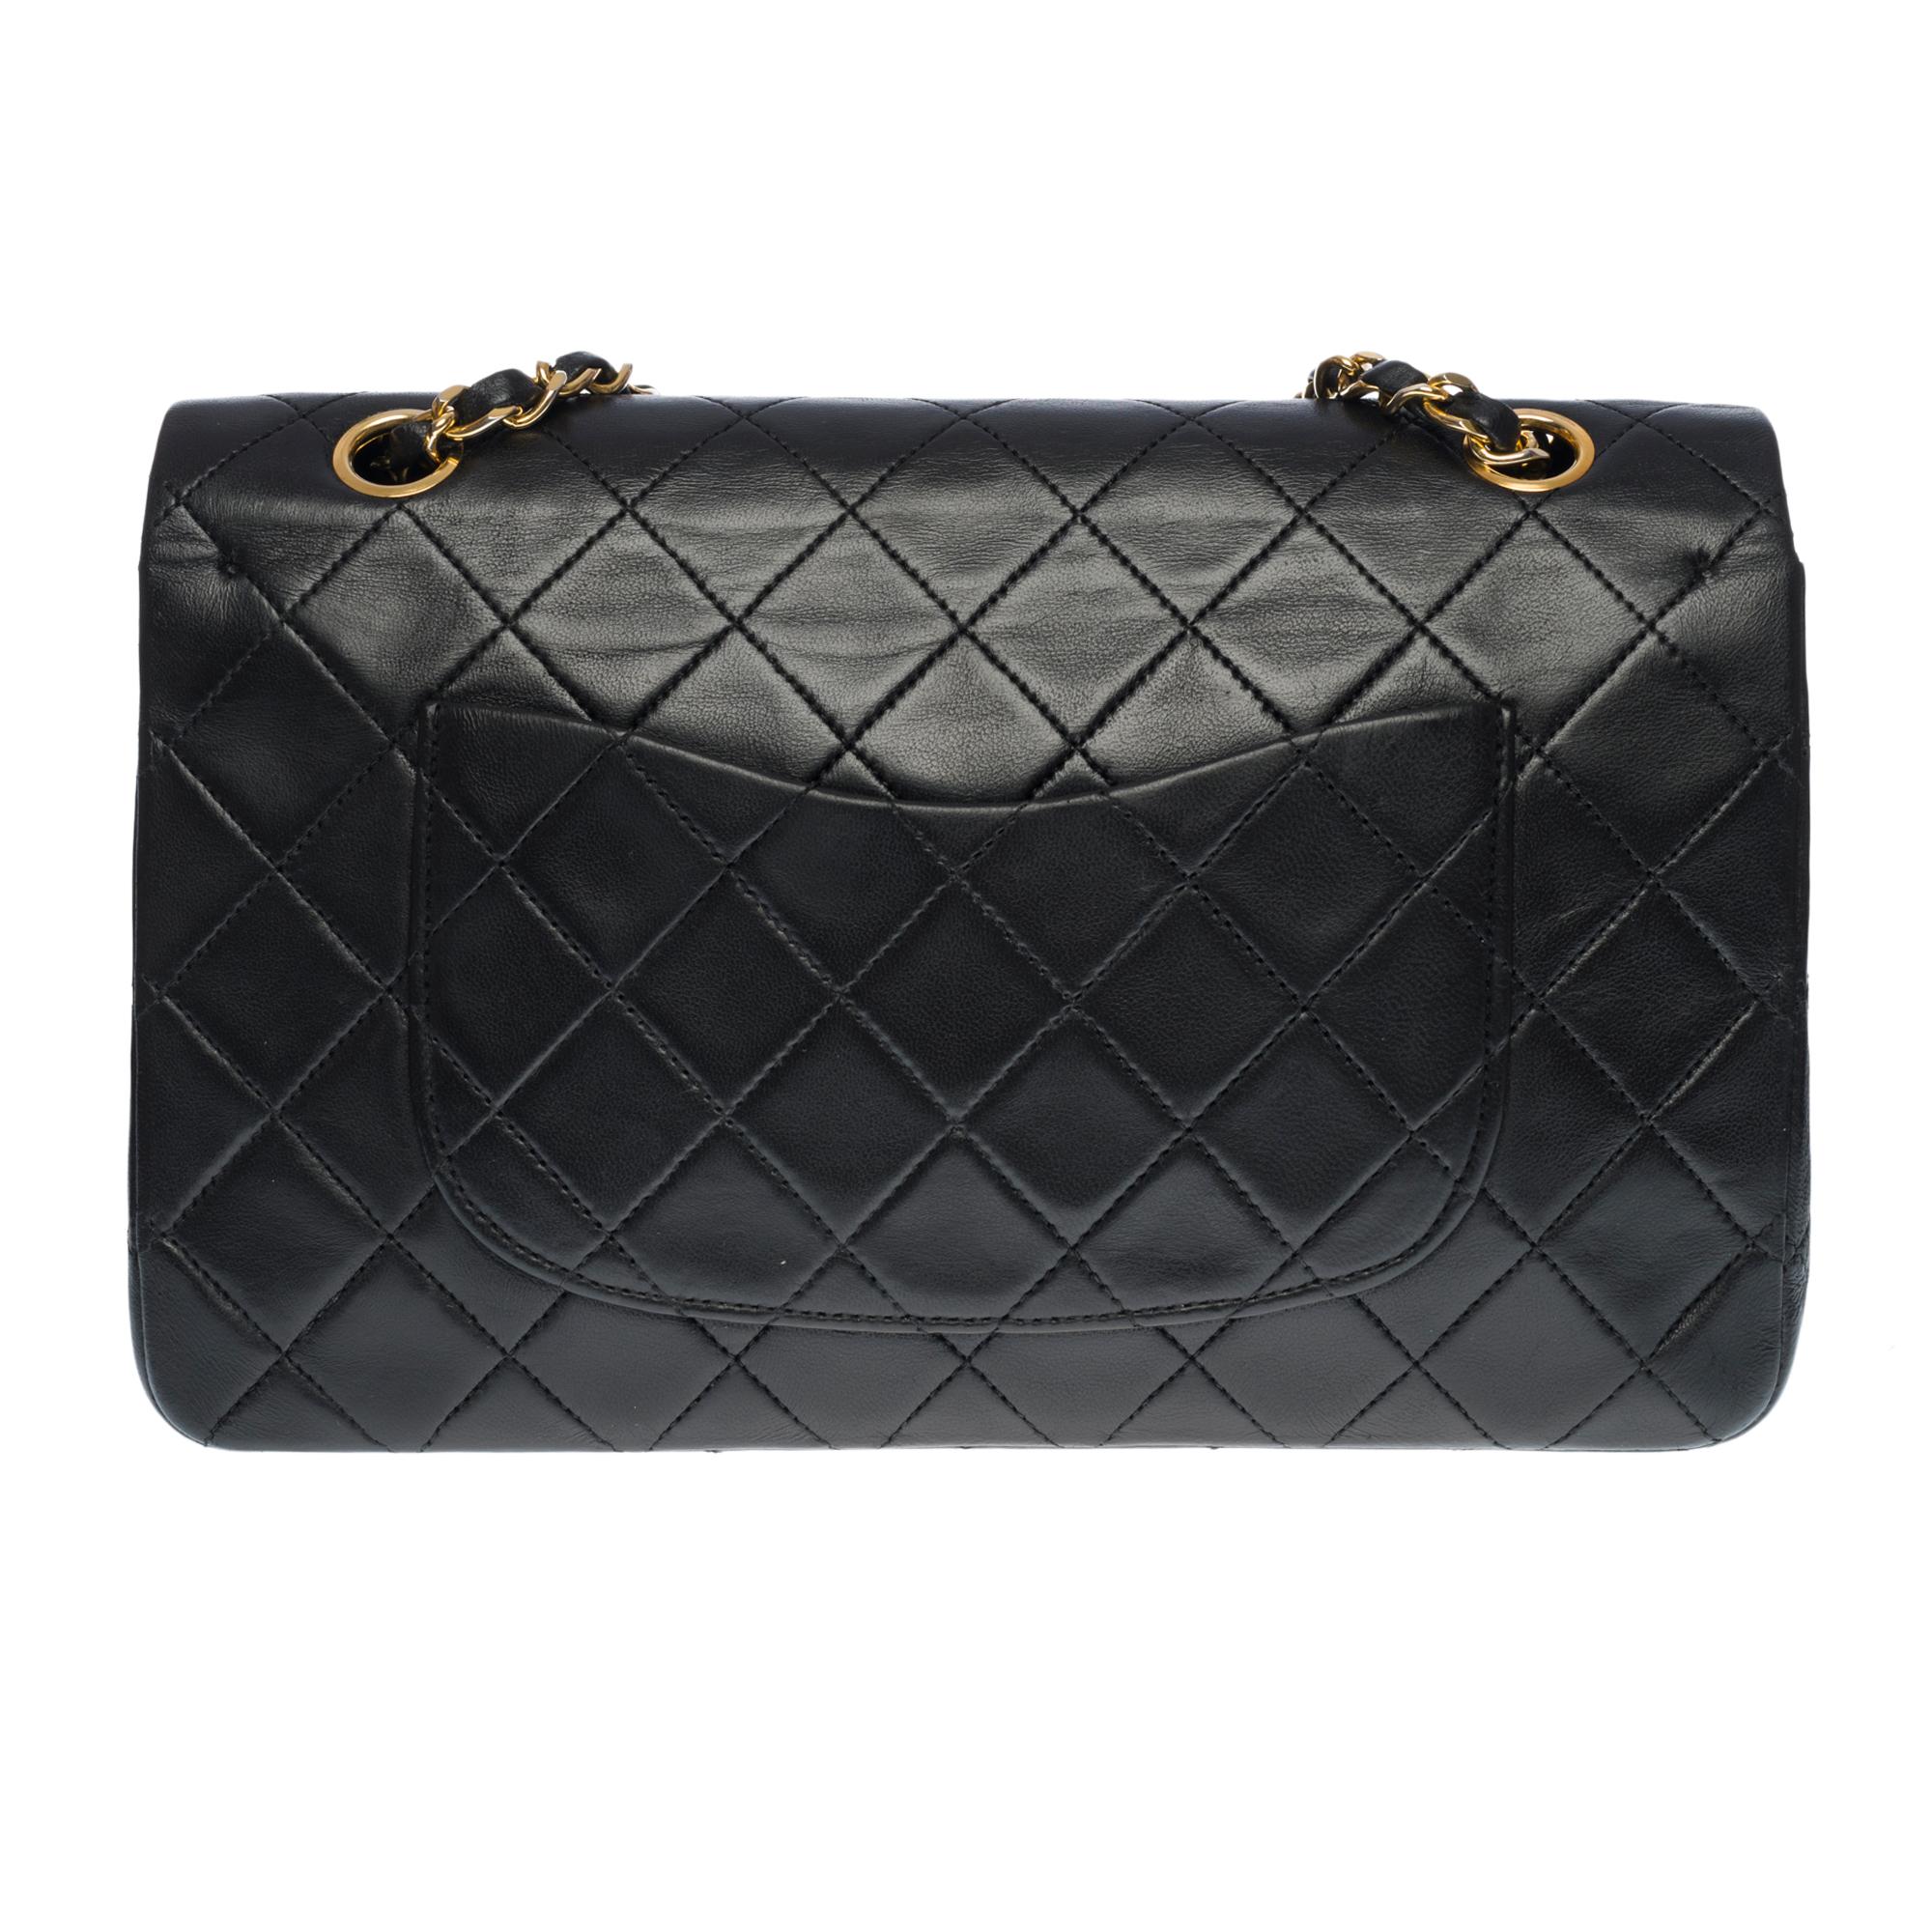 The coveted bag Chanel Timeless Medium 25 cm double flap shoulder bag in black quilted leather, gold metal hardware, gold metal chain interwoven with black leather for a shoulder and shoulder strap

Backpack pocket
Flap closure, gold-tone CC